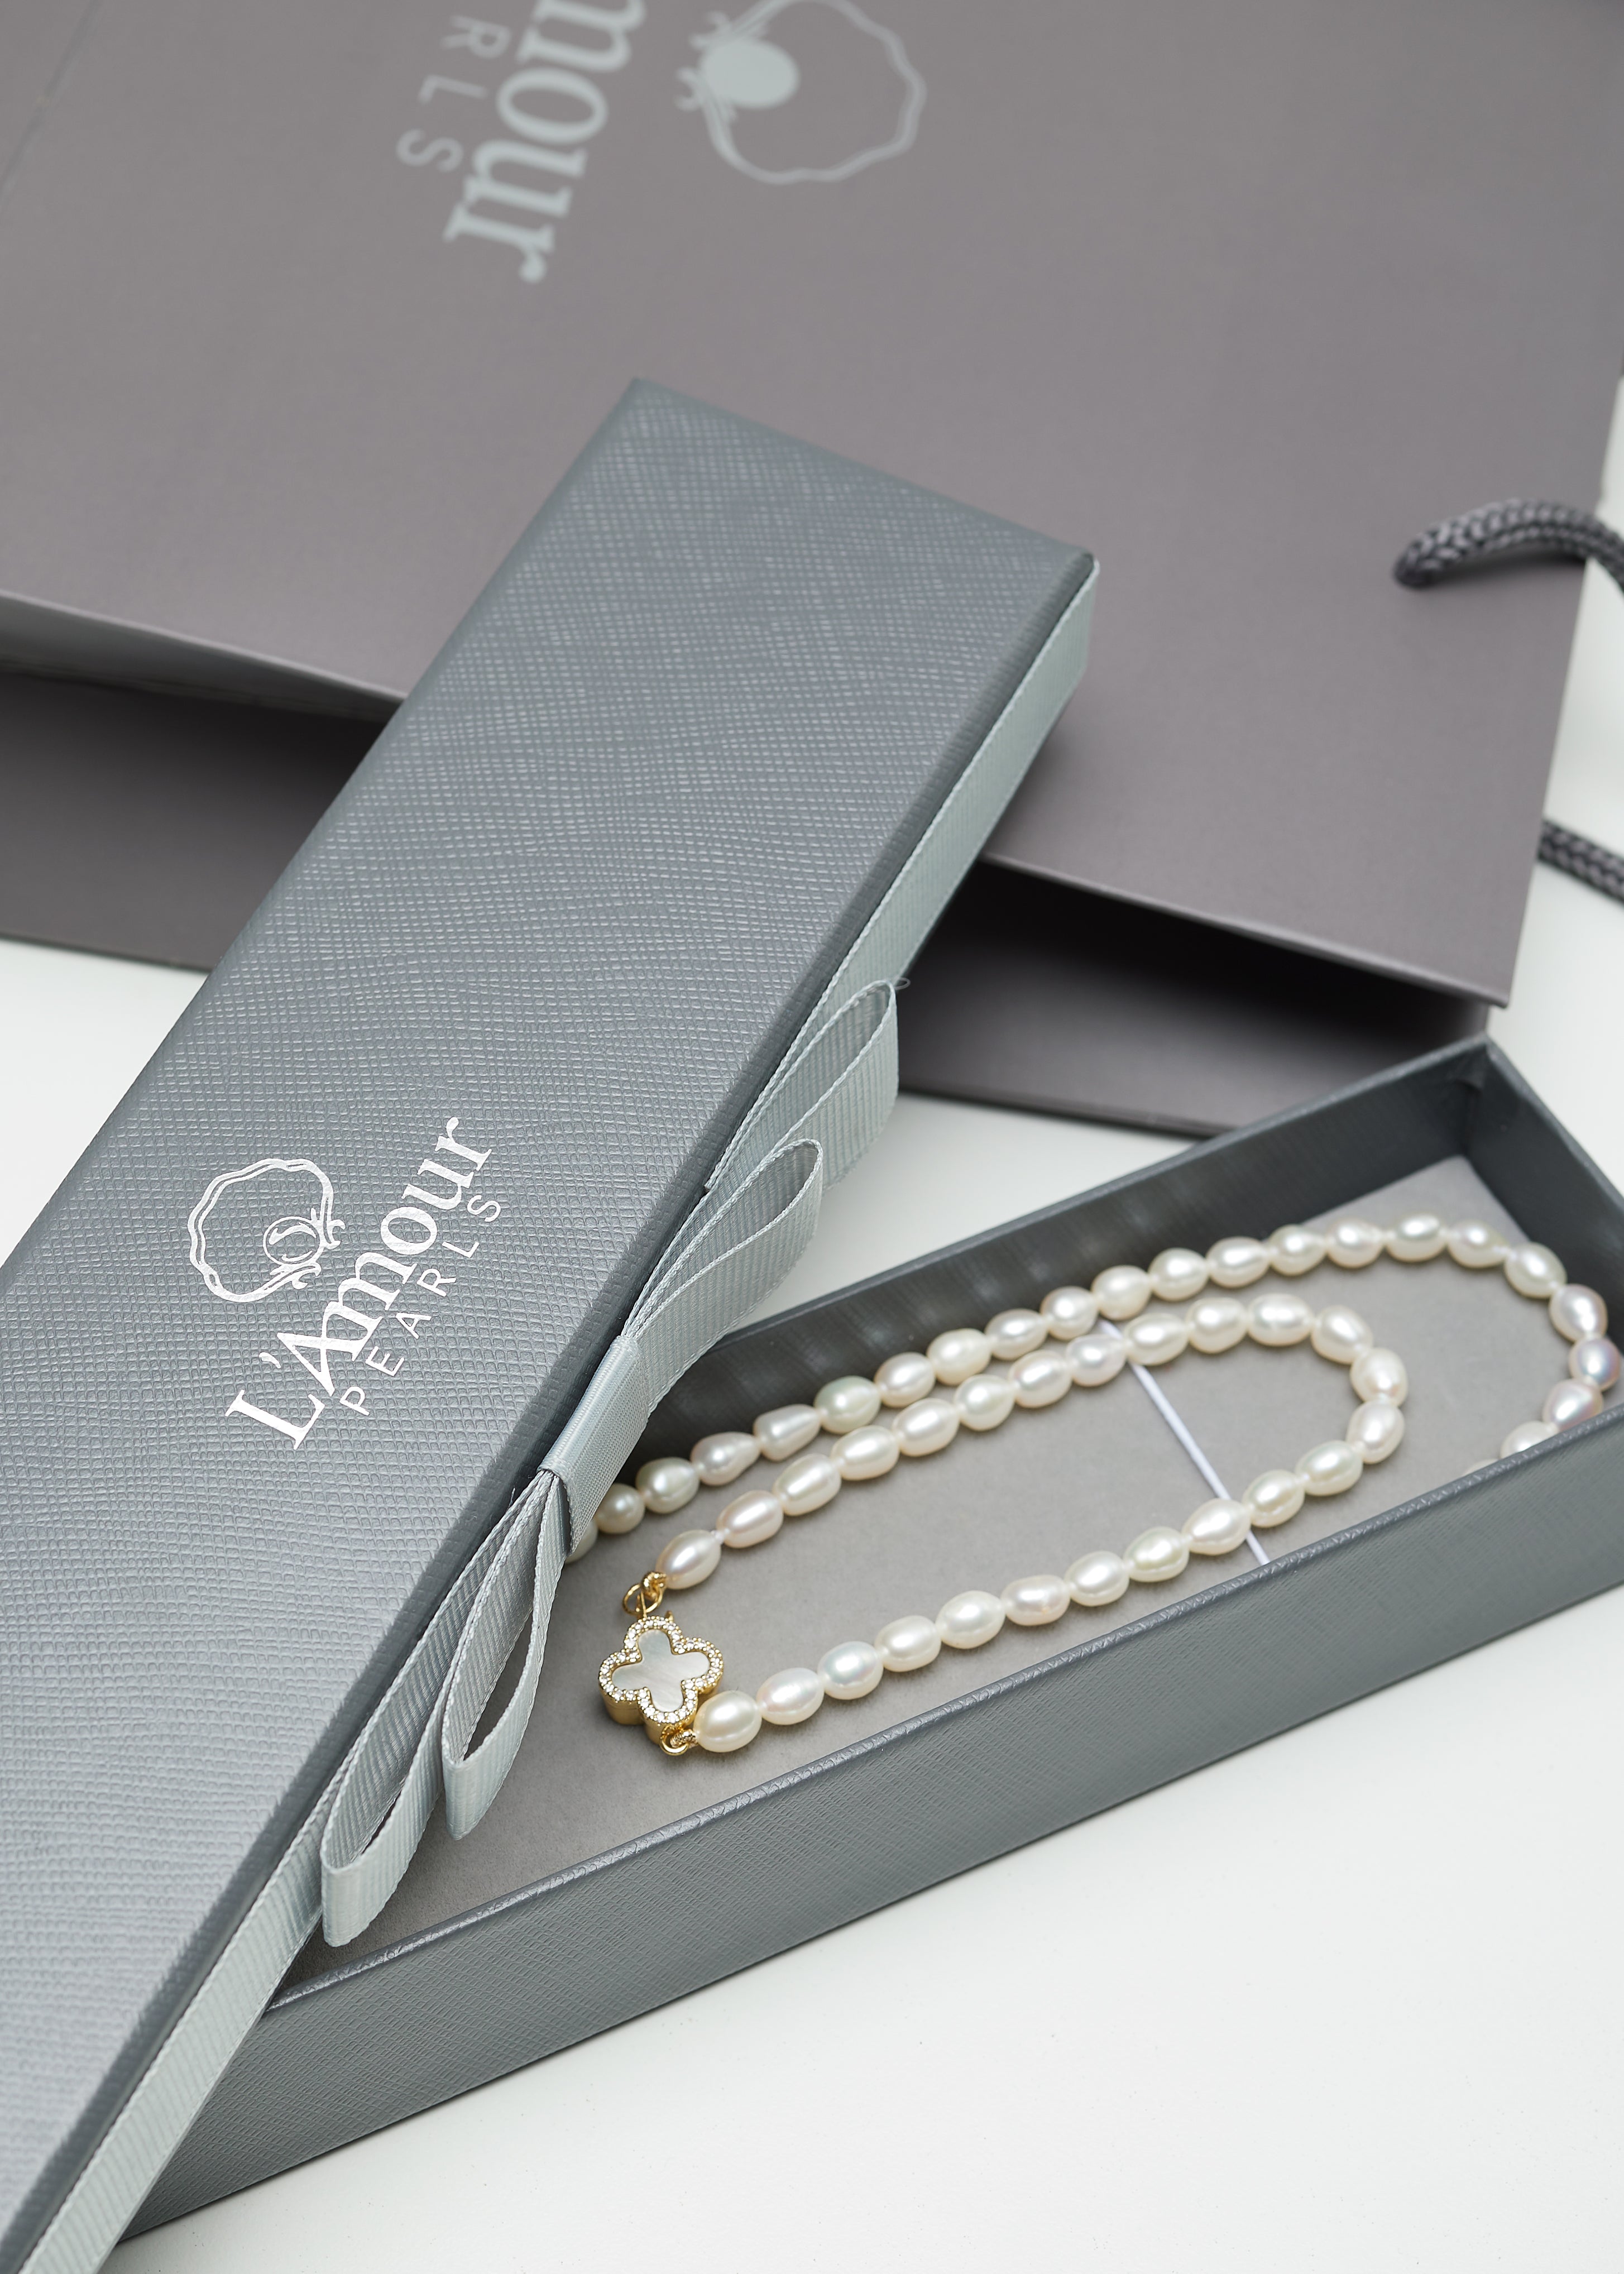 Luxury Made With Love, A New Approach To Corporate Gifting